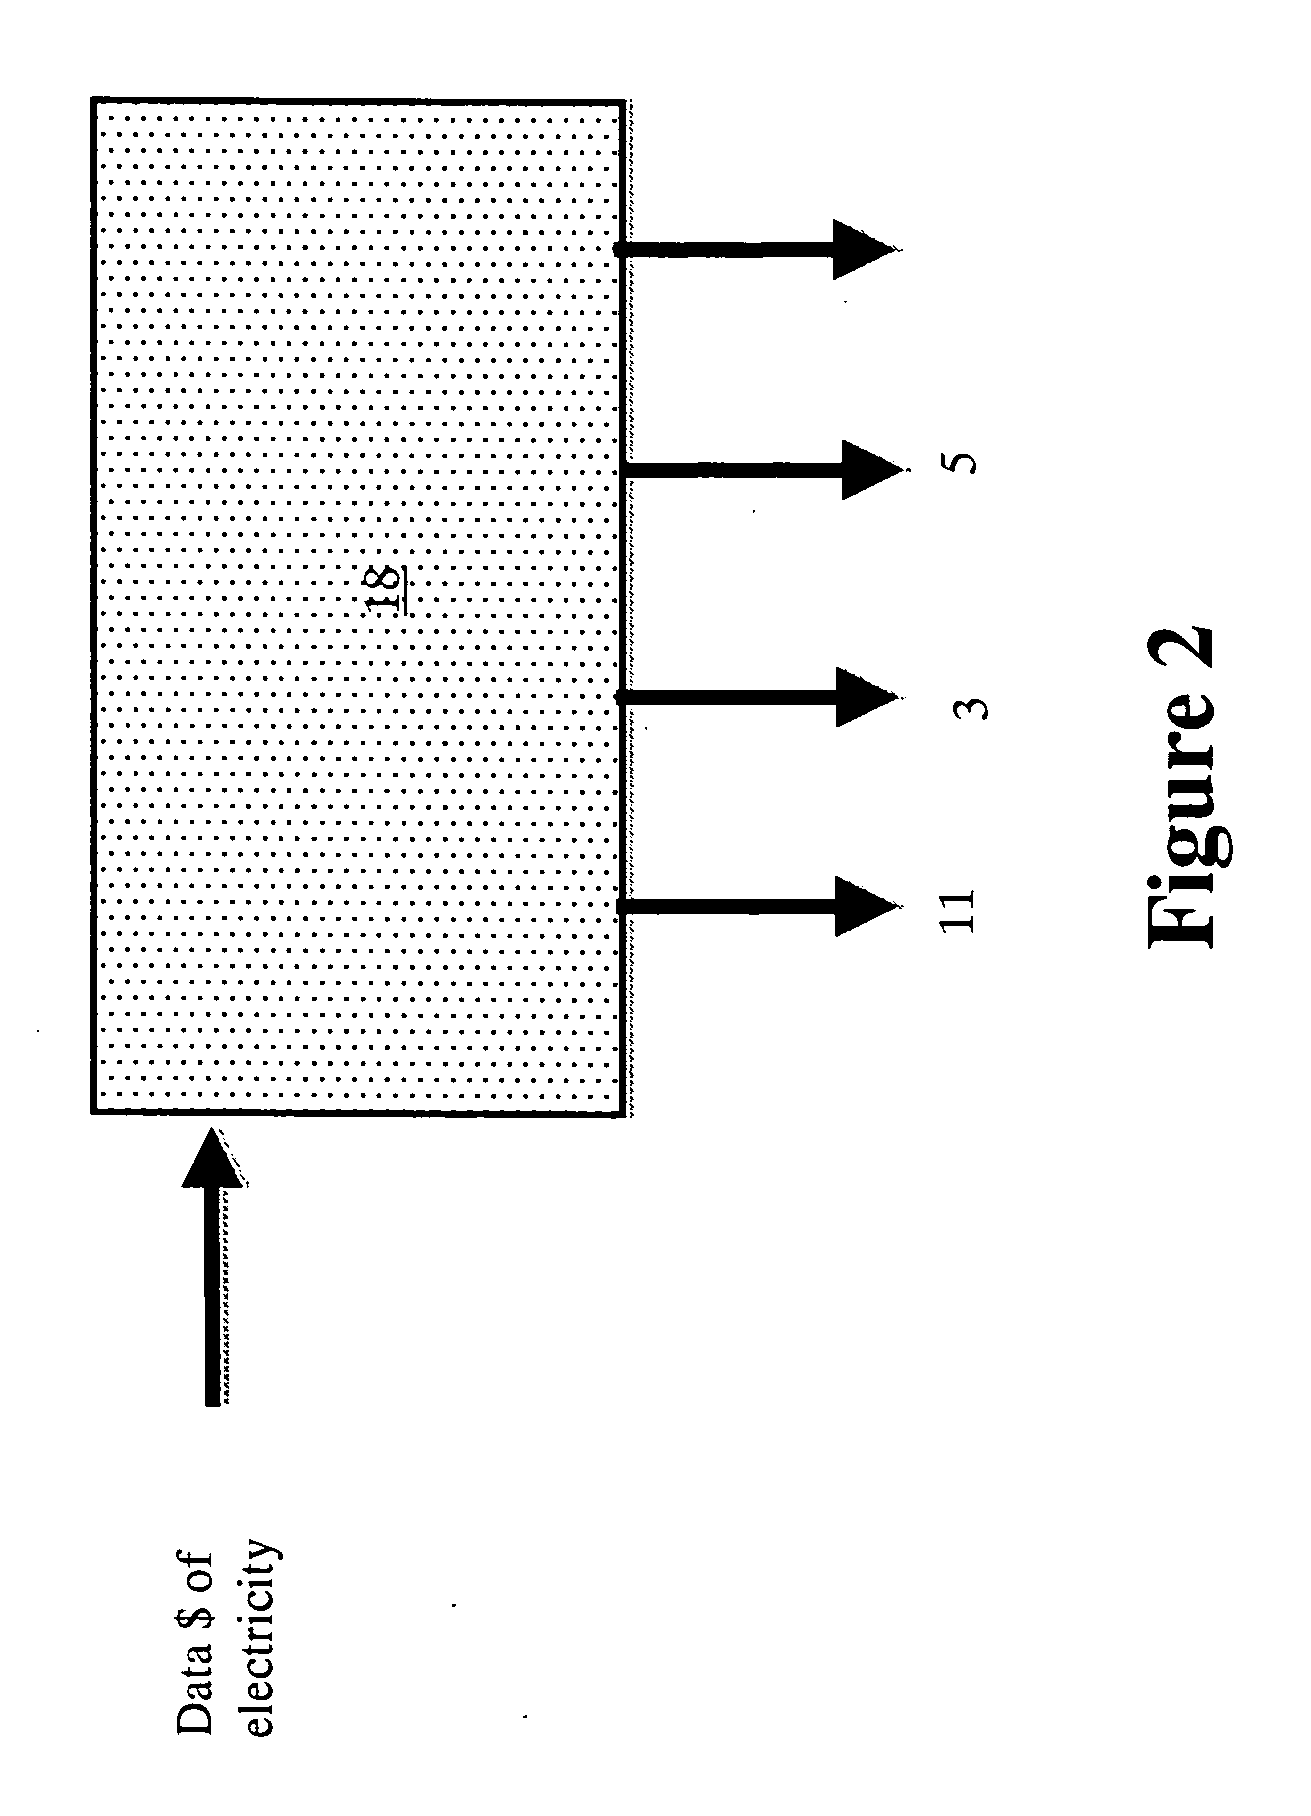 System for storing electrical energy